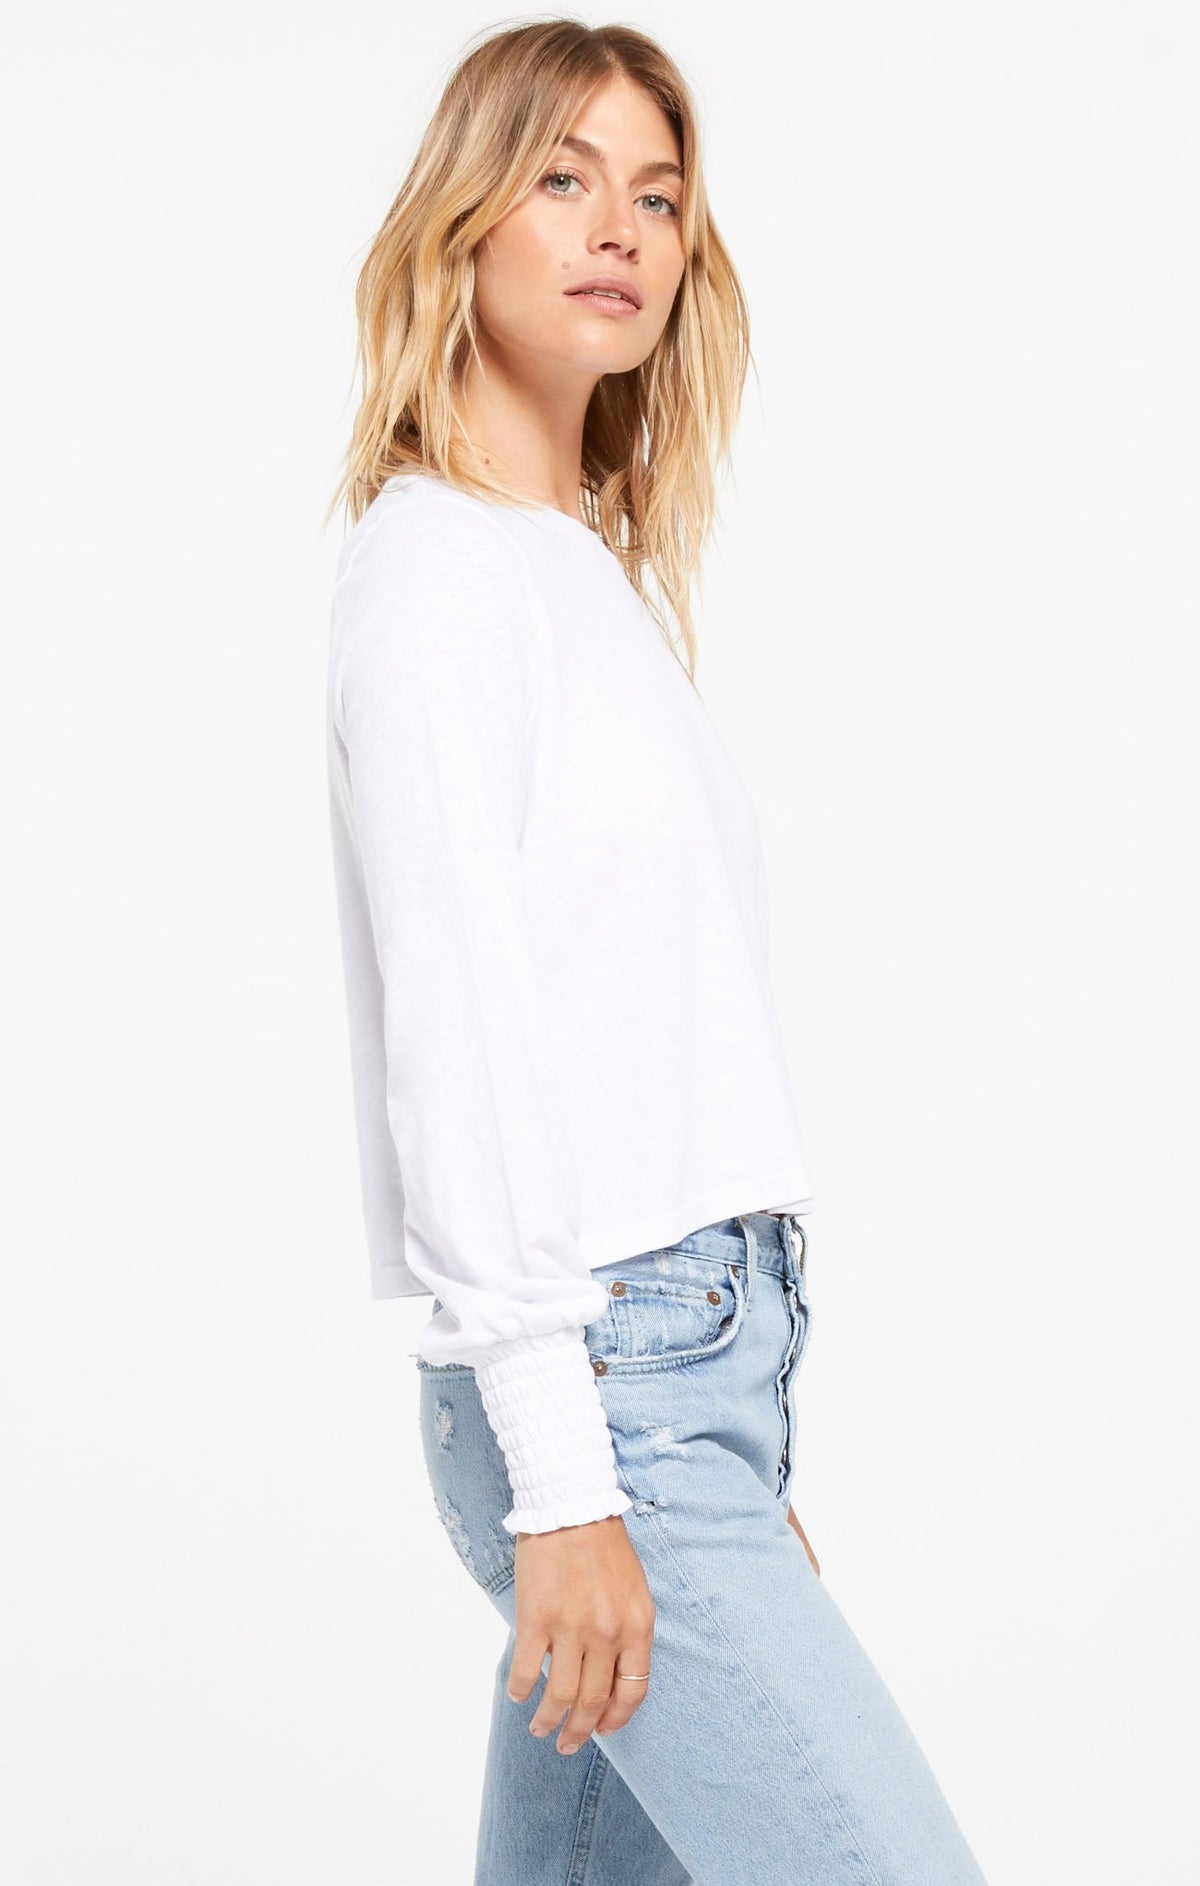 Z Supply "Lyla" Knit Top With Elastic Puff Sleeve Detail | Black, White